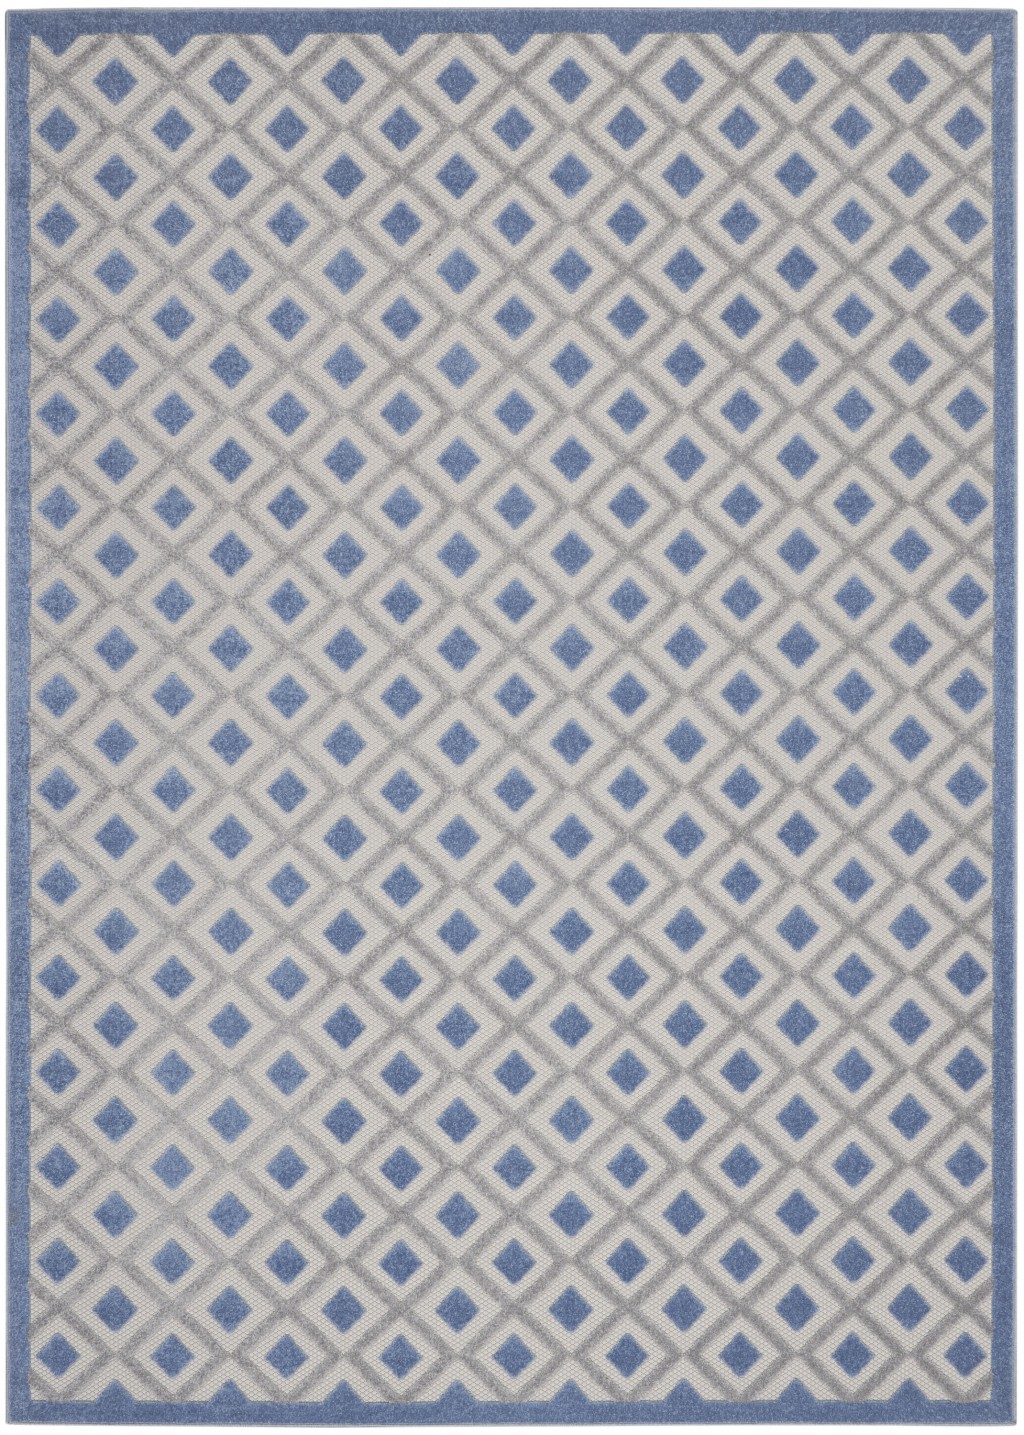 7' X 10' Blue And Gray Geometric Indoor Outdoor Area Rug-385157-1